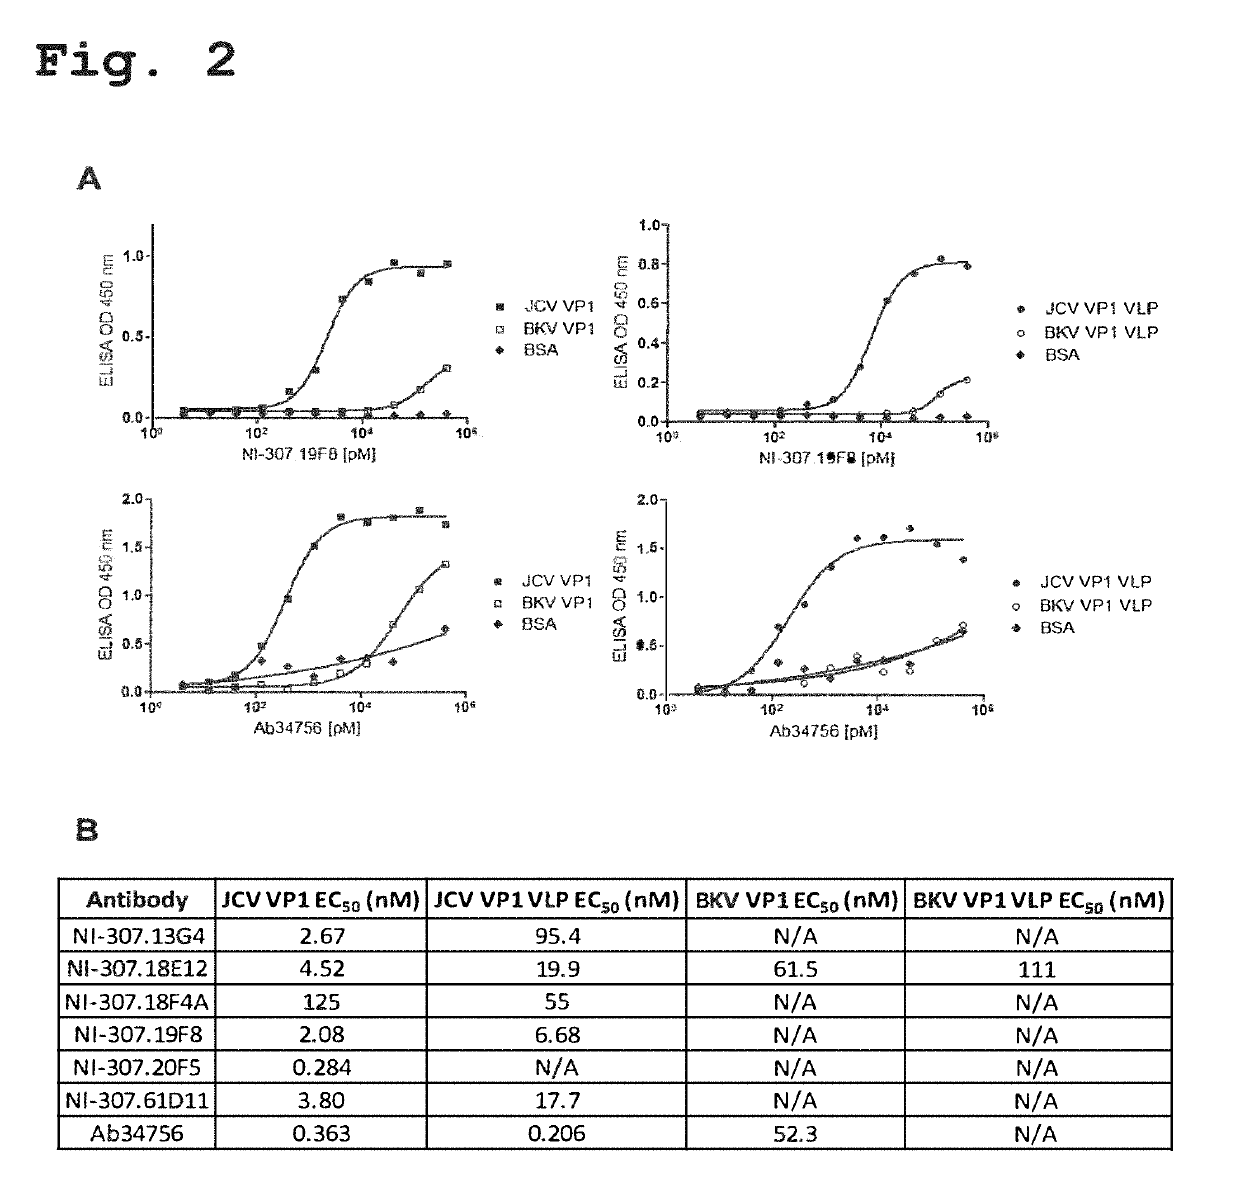 Recombinant human antibodies for therapy and prevention of polyomavirus-related diseases